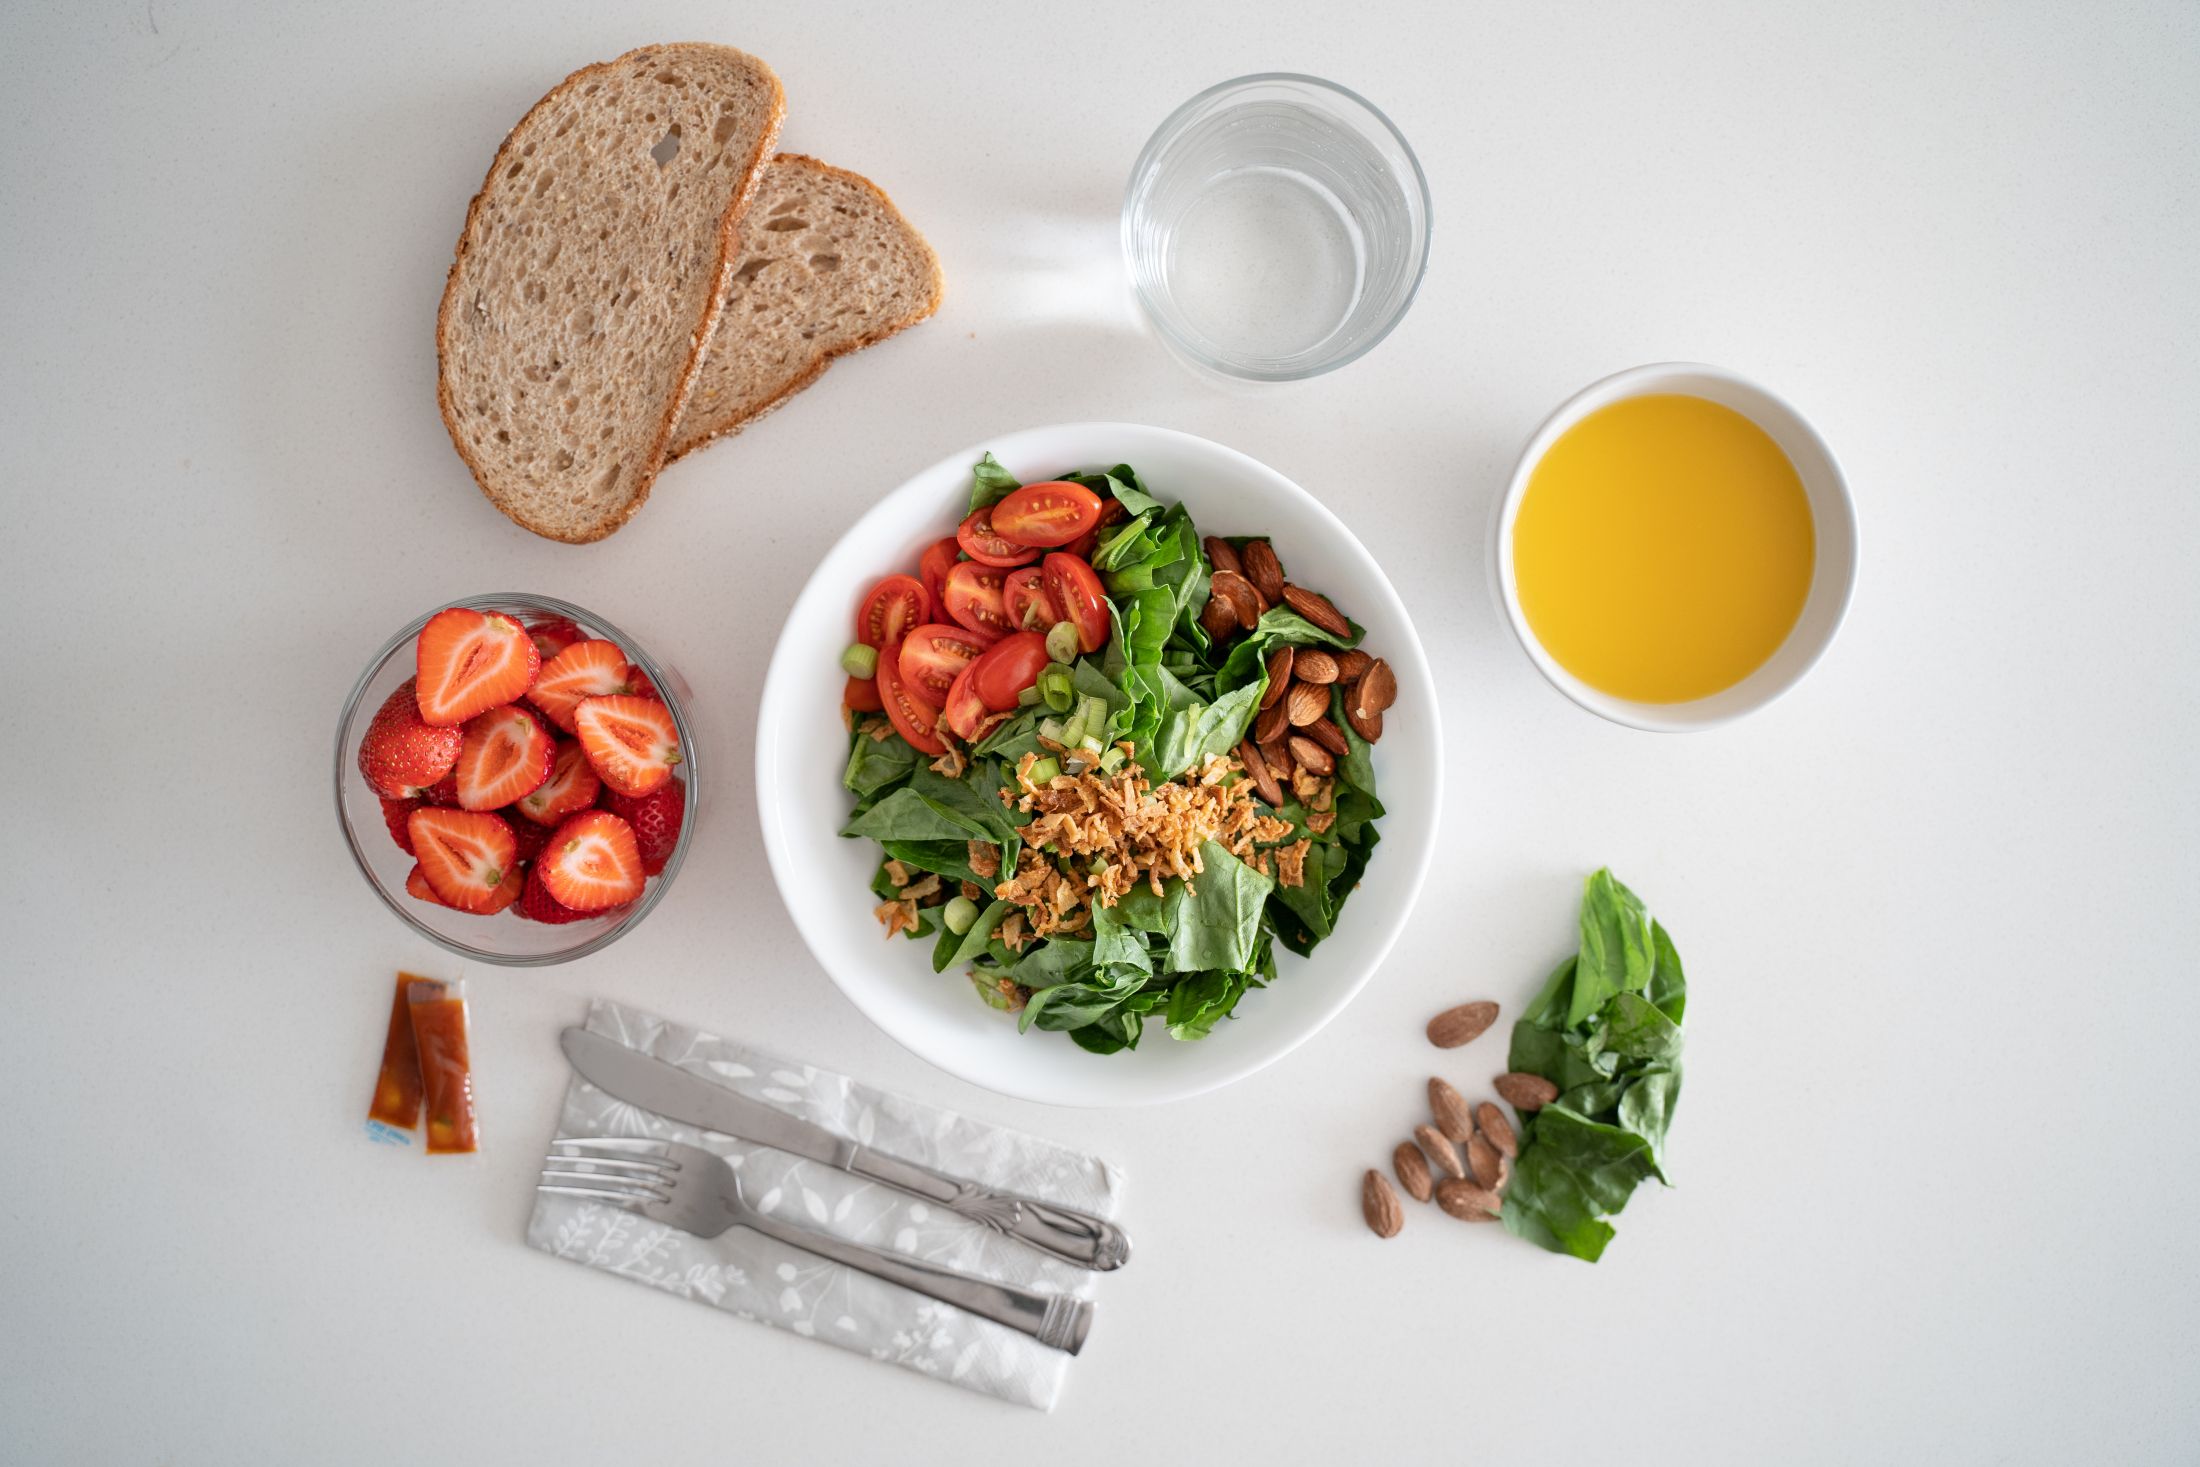 bowl-of-salad-with-herbs-tomatoes-and-almonds-on-the-table-with-strawberries-and-bread-slices.jpg